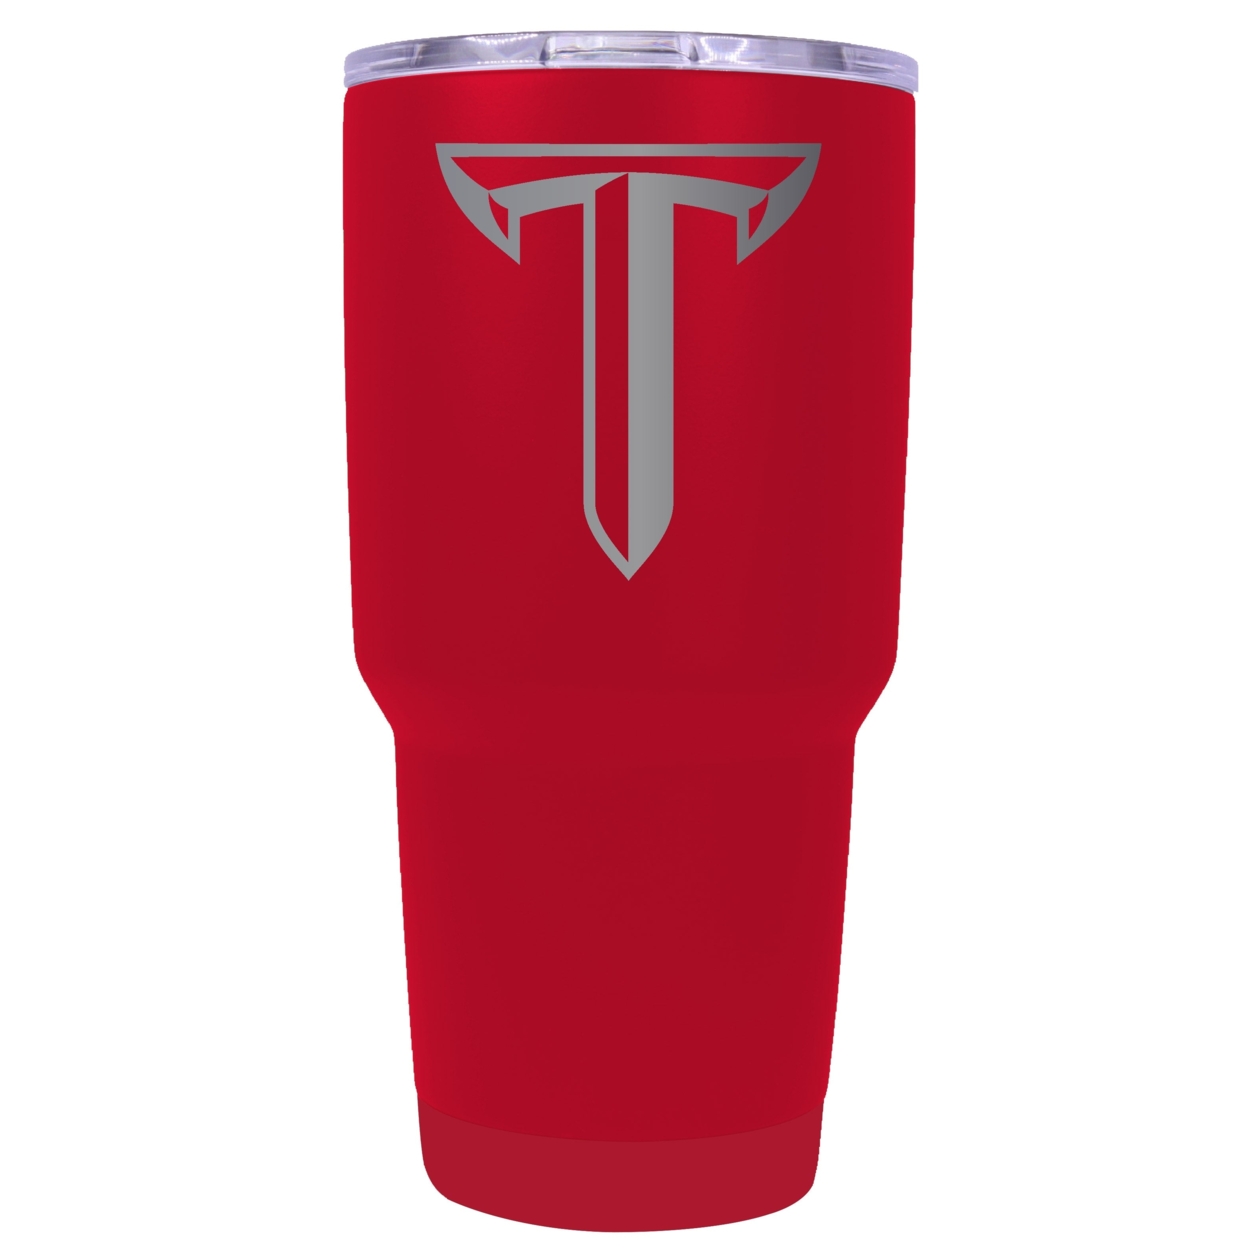 Troy University 24 Oz Laser Engraved Stainless Steel Insulated Tumbler - Choose Your Color. - Coral